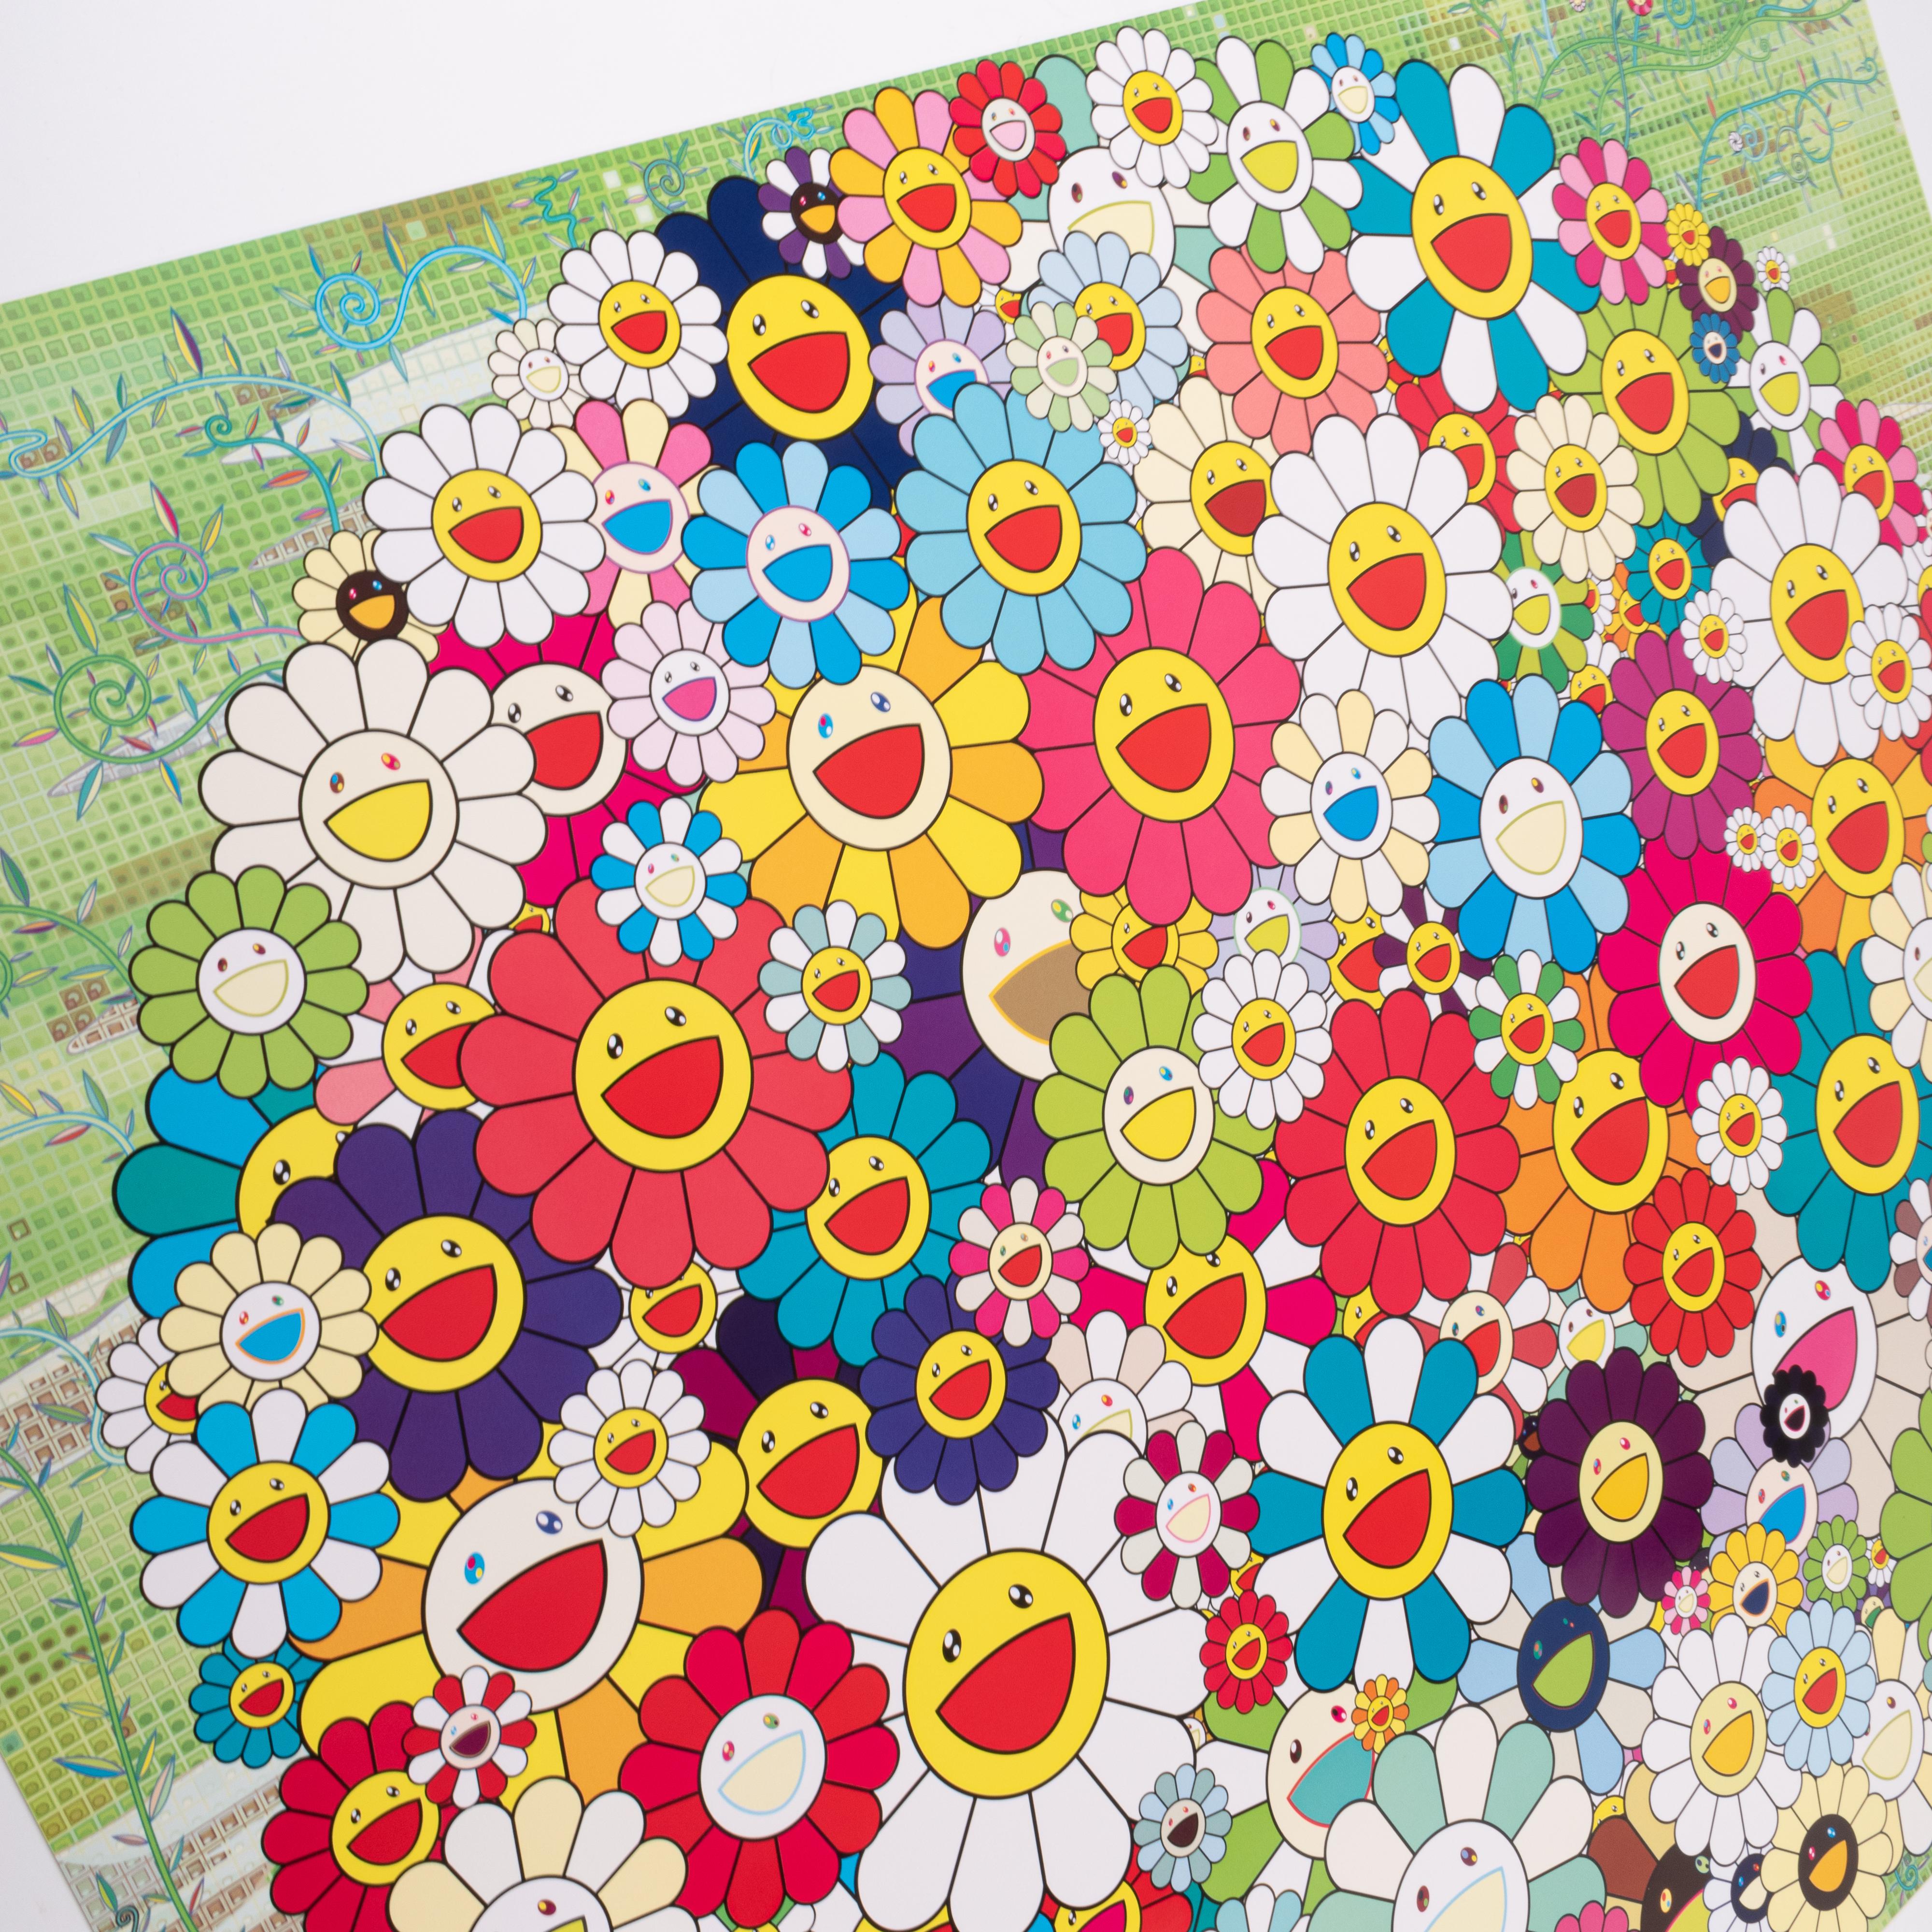 Open Your Hands Wide - Contemporary Print by Takashi Murakami